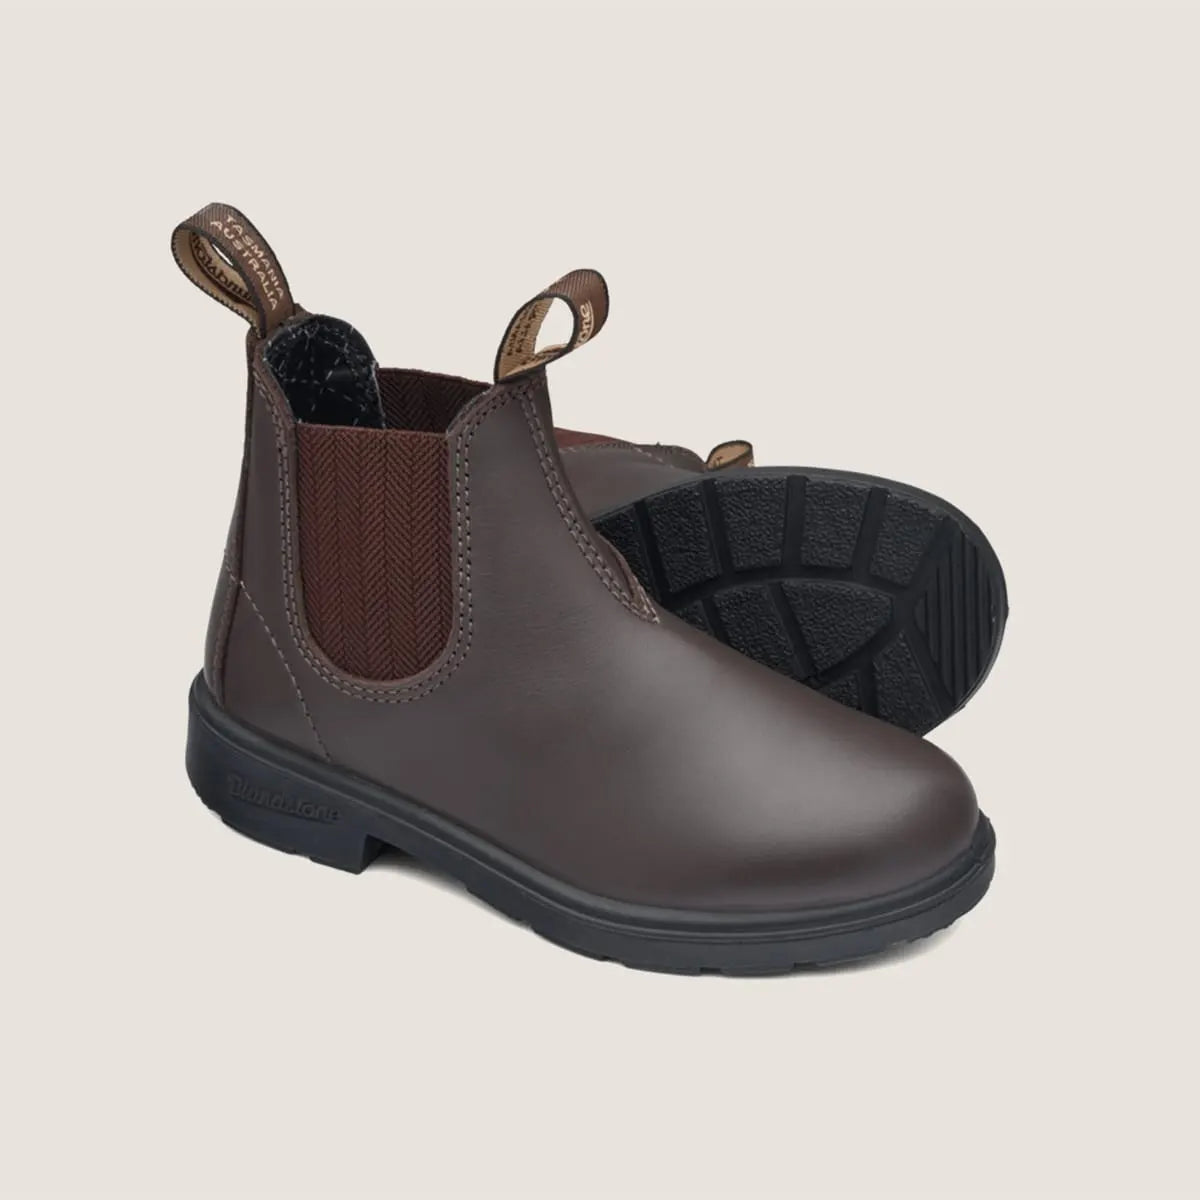 Blundstone 630 Kids Casual Boots Leather-Brown